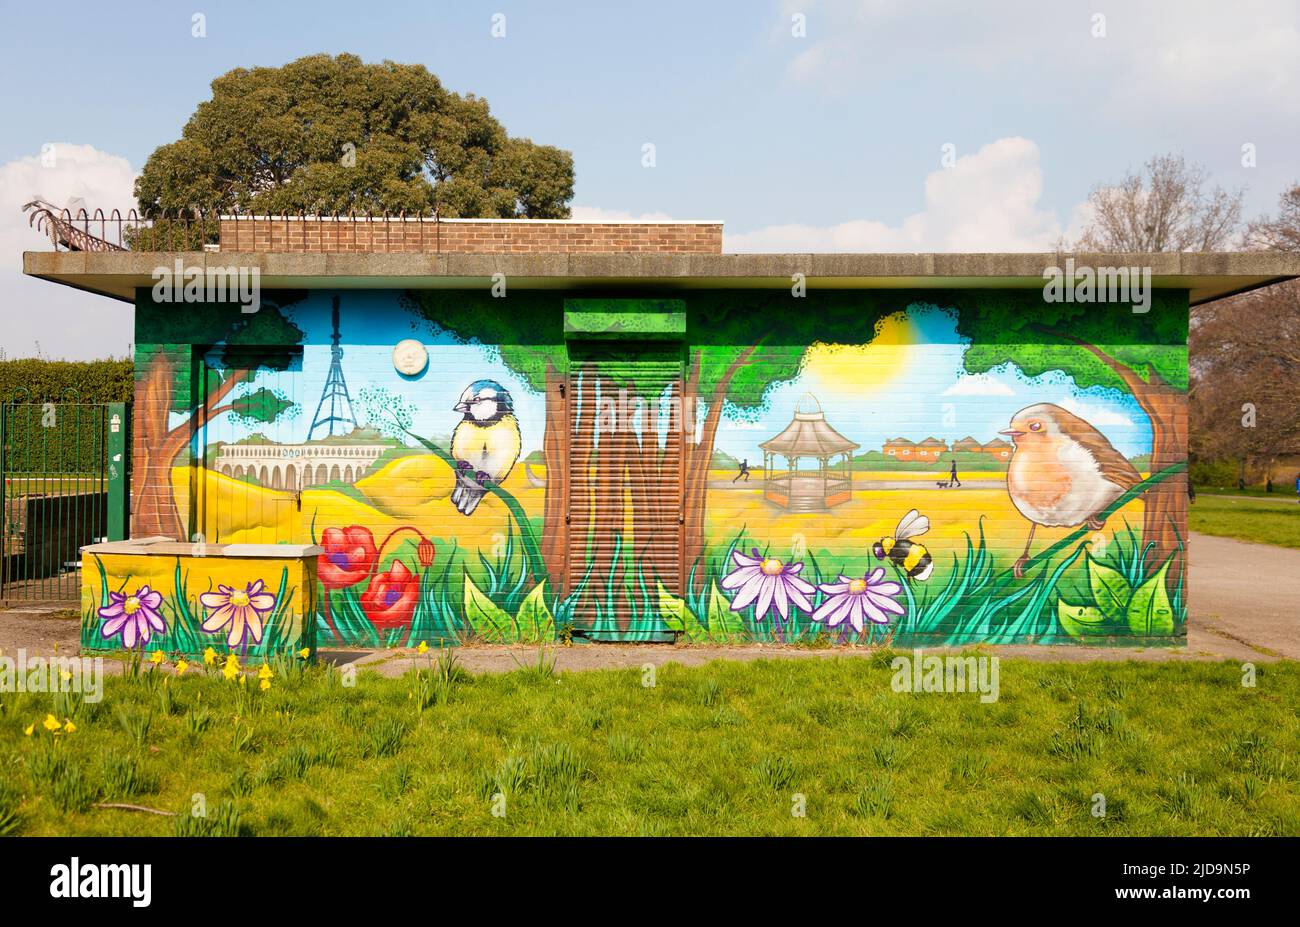 Street art on wall of football changing rooms in park, Penge, SE London, UK. Stock Photo